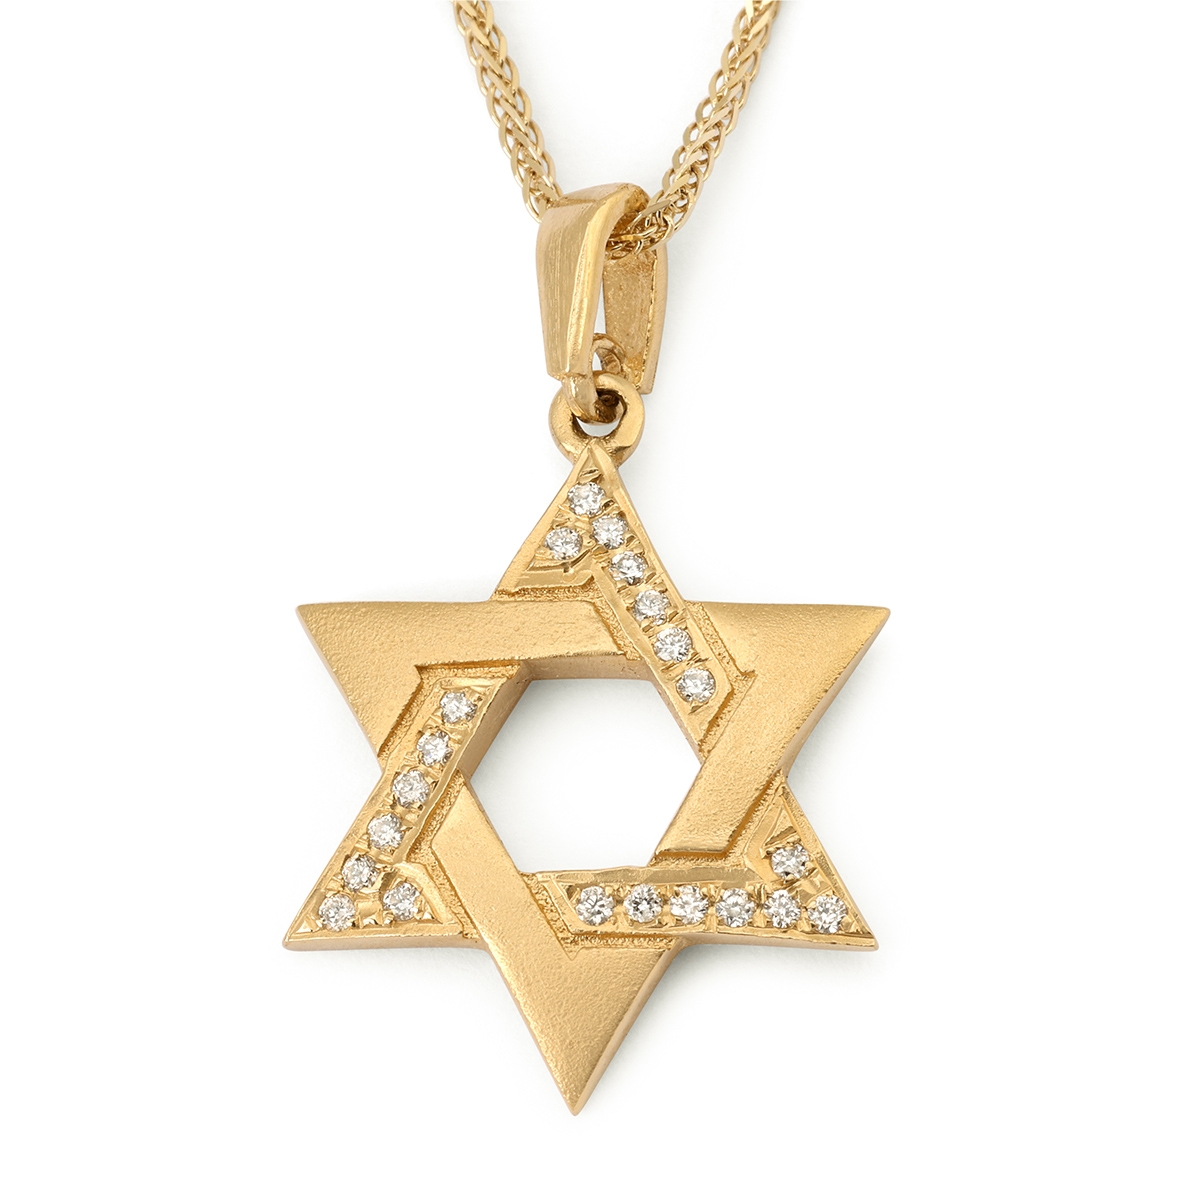 14K Gold Domed Star of David Pendant with Diamond Studded Triangle - 1